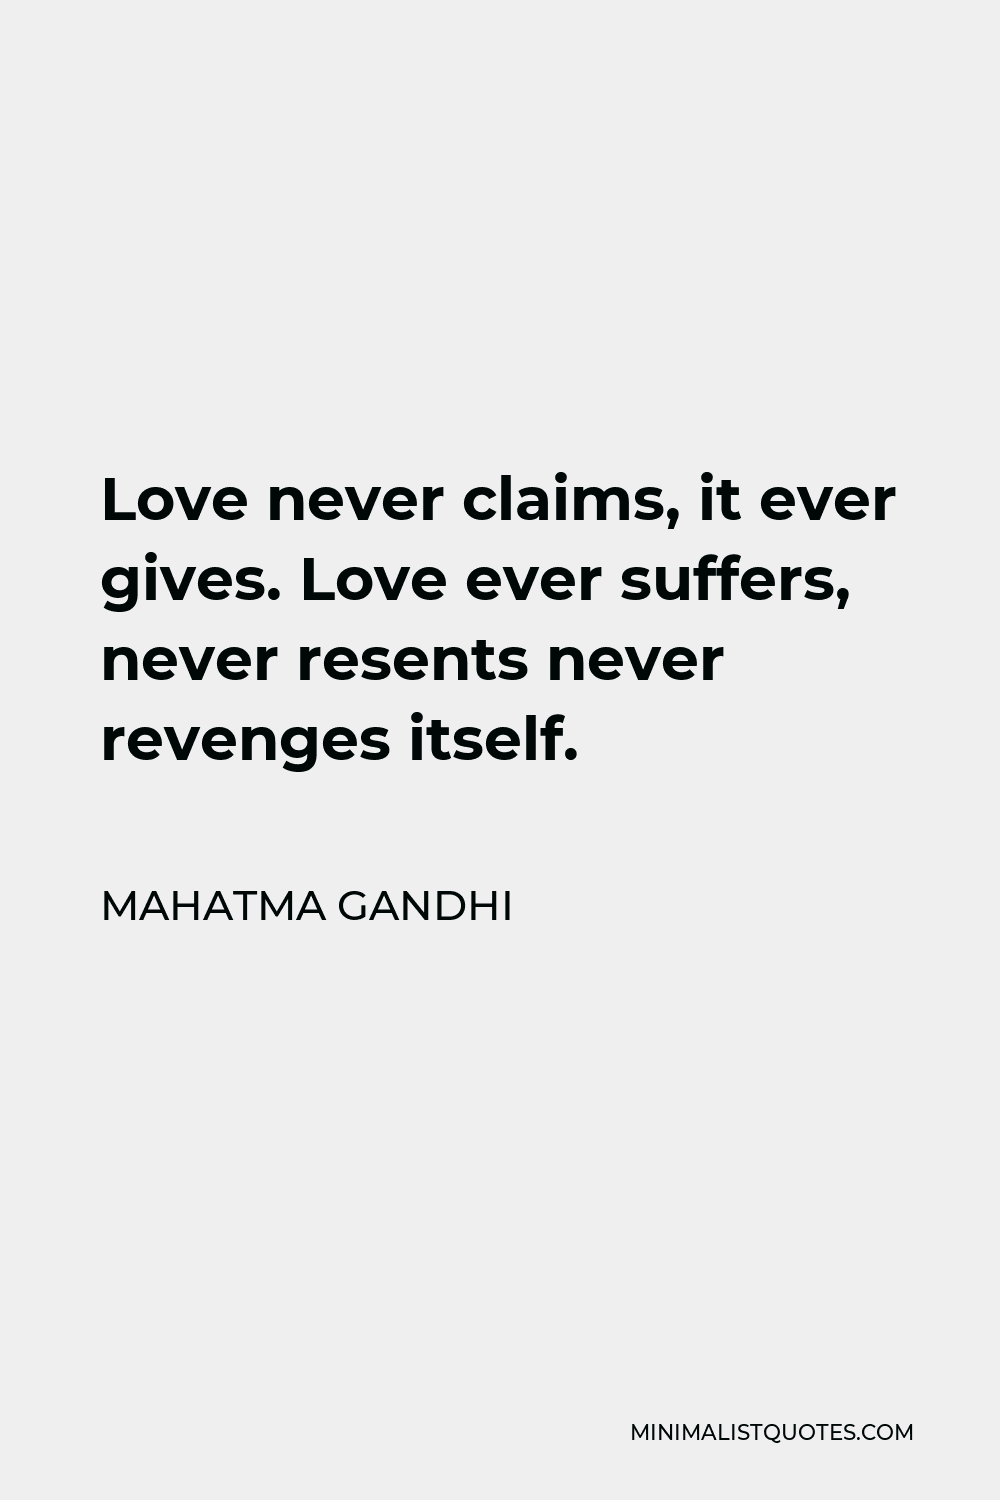 Mahatma Gandhi Quote - Love never claims, it ever gives. Love ever suffers, never resents never revenges itself.